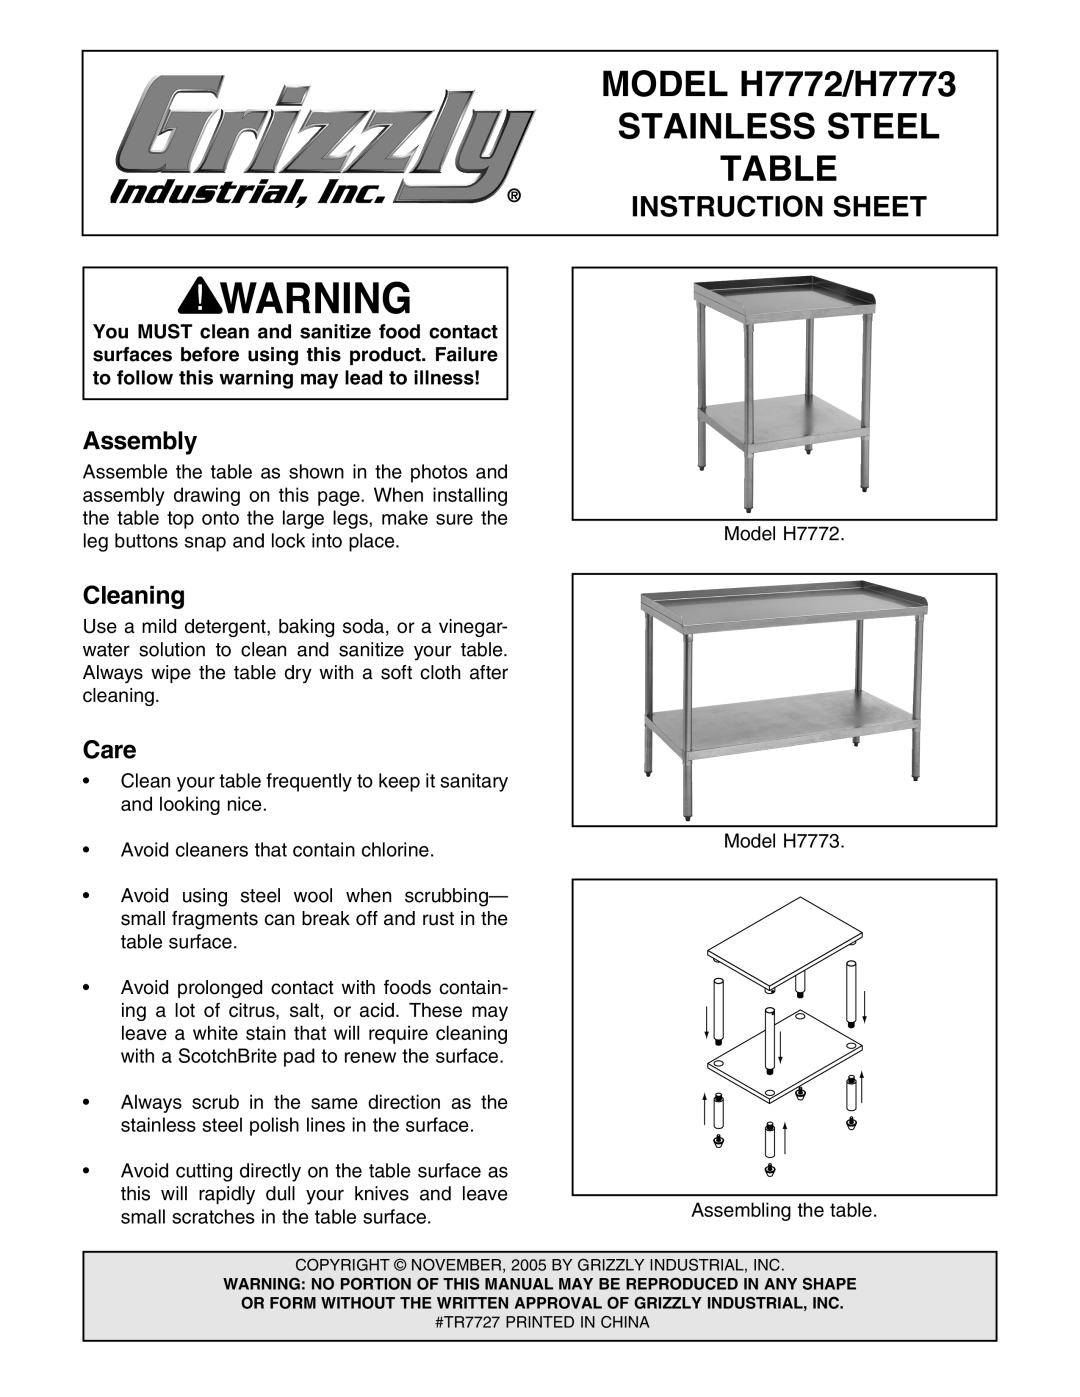 Grizzly instruction sheet Assembly, Cleaning, Care, MODEL H7772/H7773, Stainless Steel, Instruction Sheet 